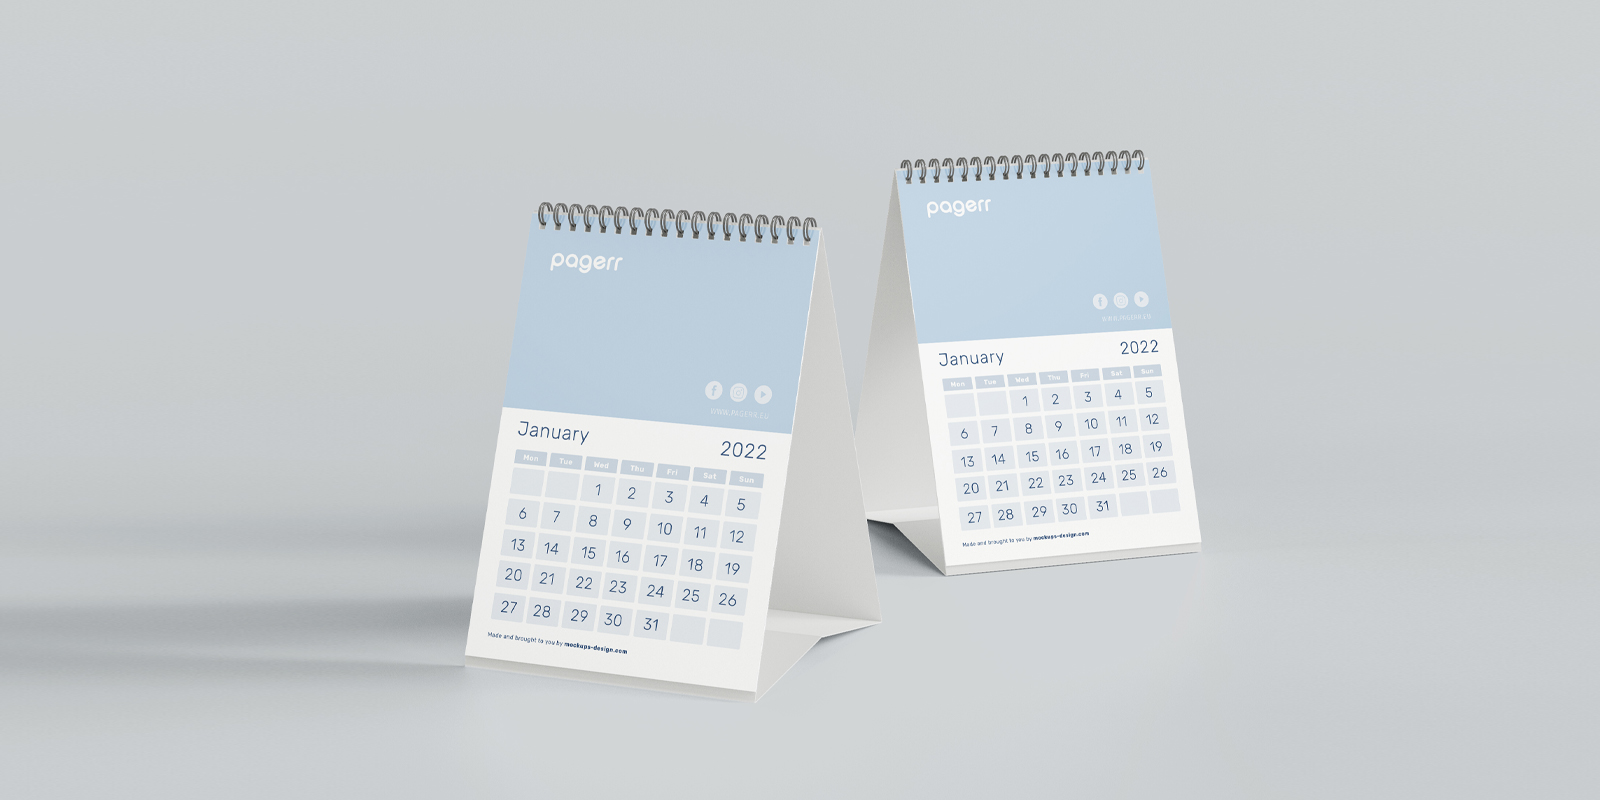 Desk calendars in Darwin - Print with Pagerr